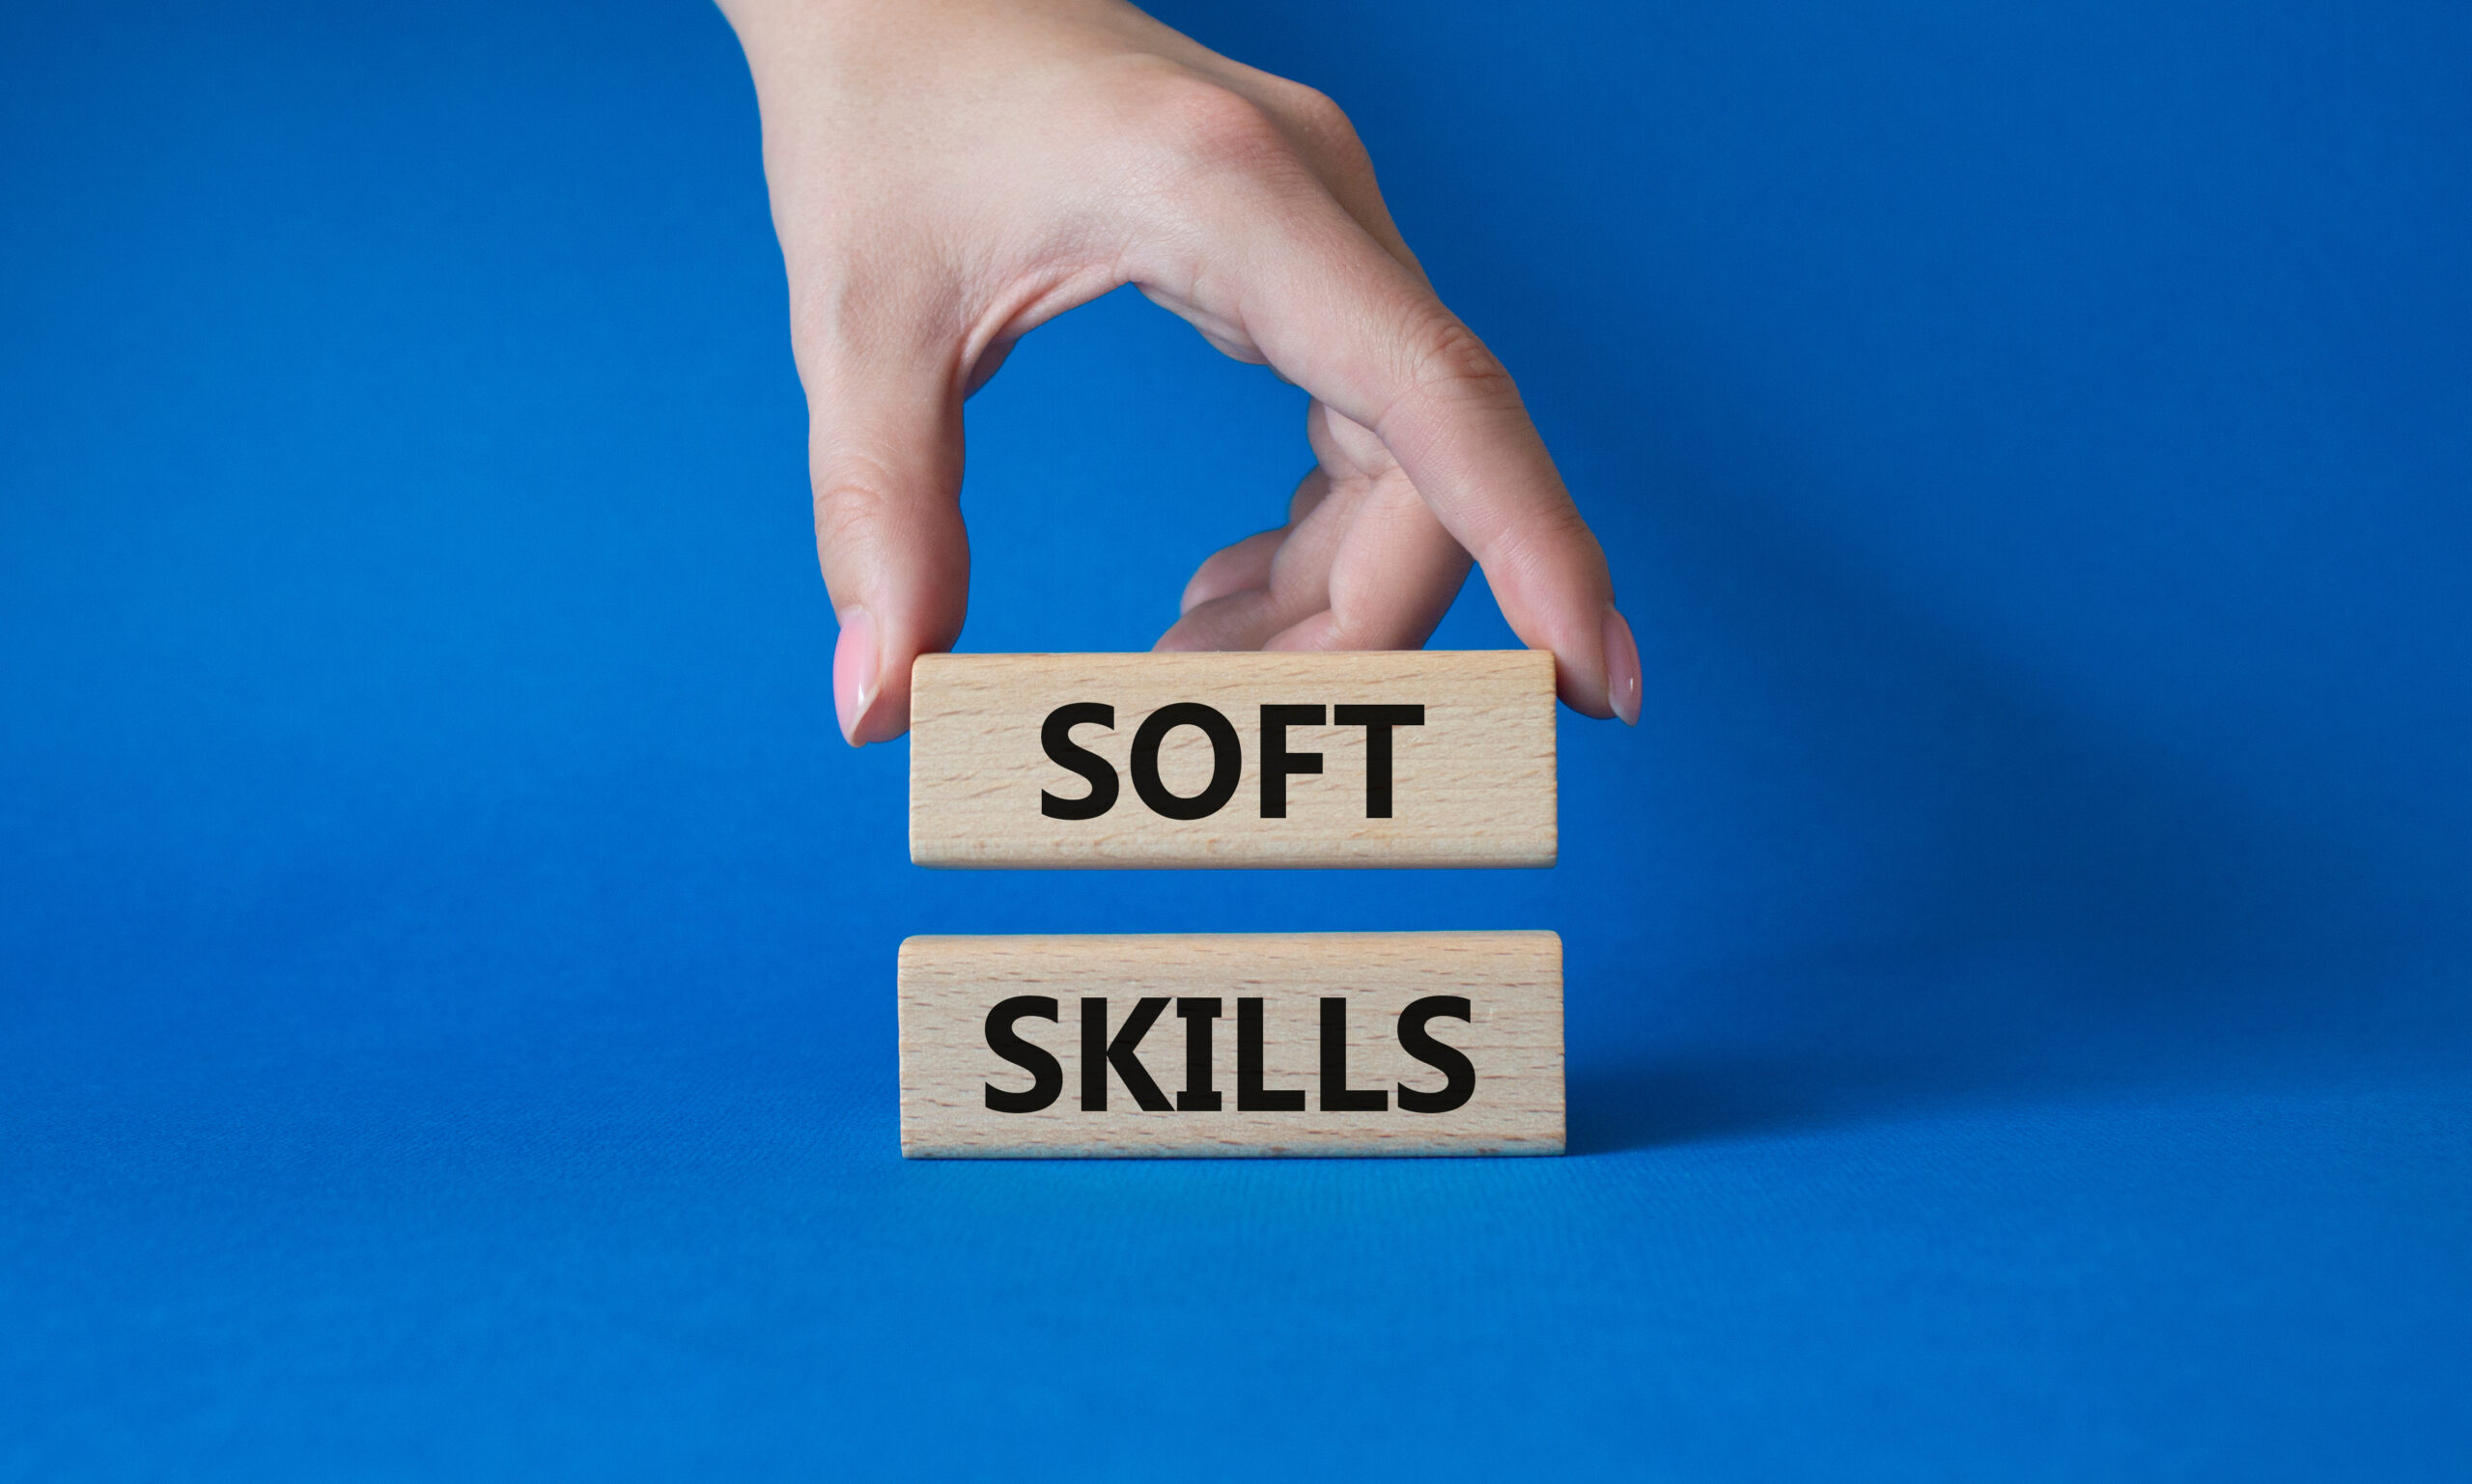 Soft skills that are key for careers in skilled trades